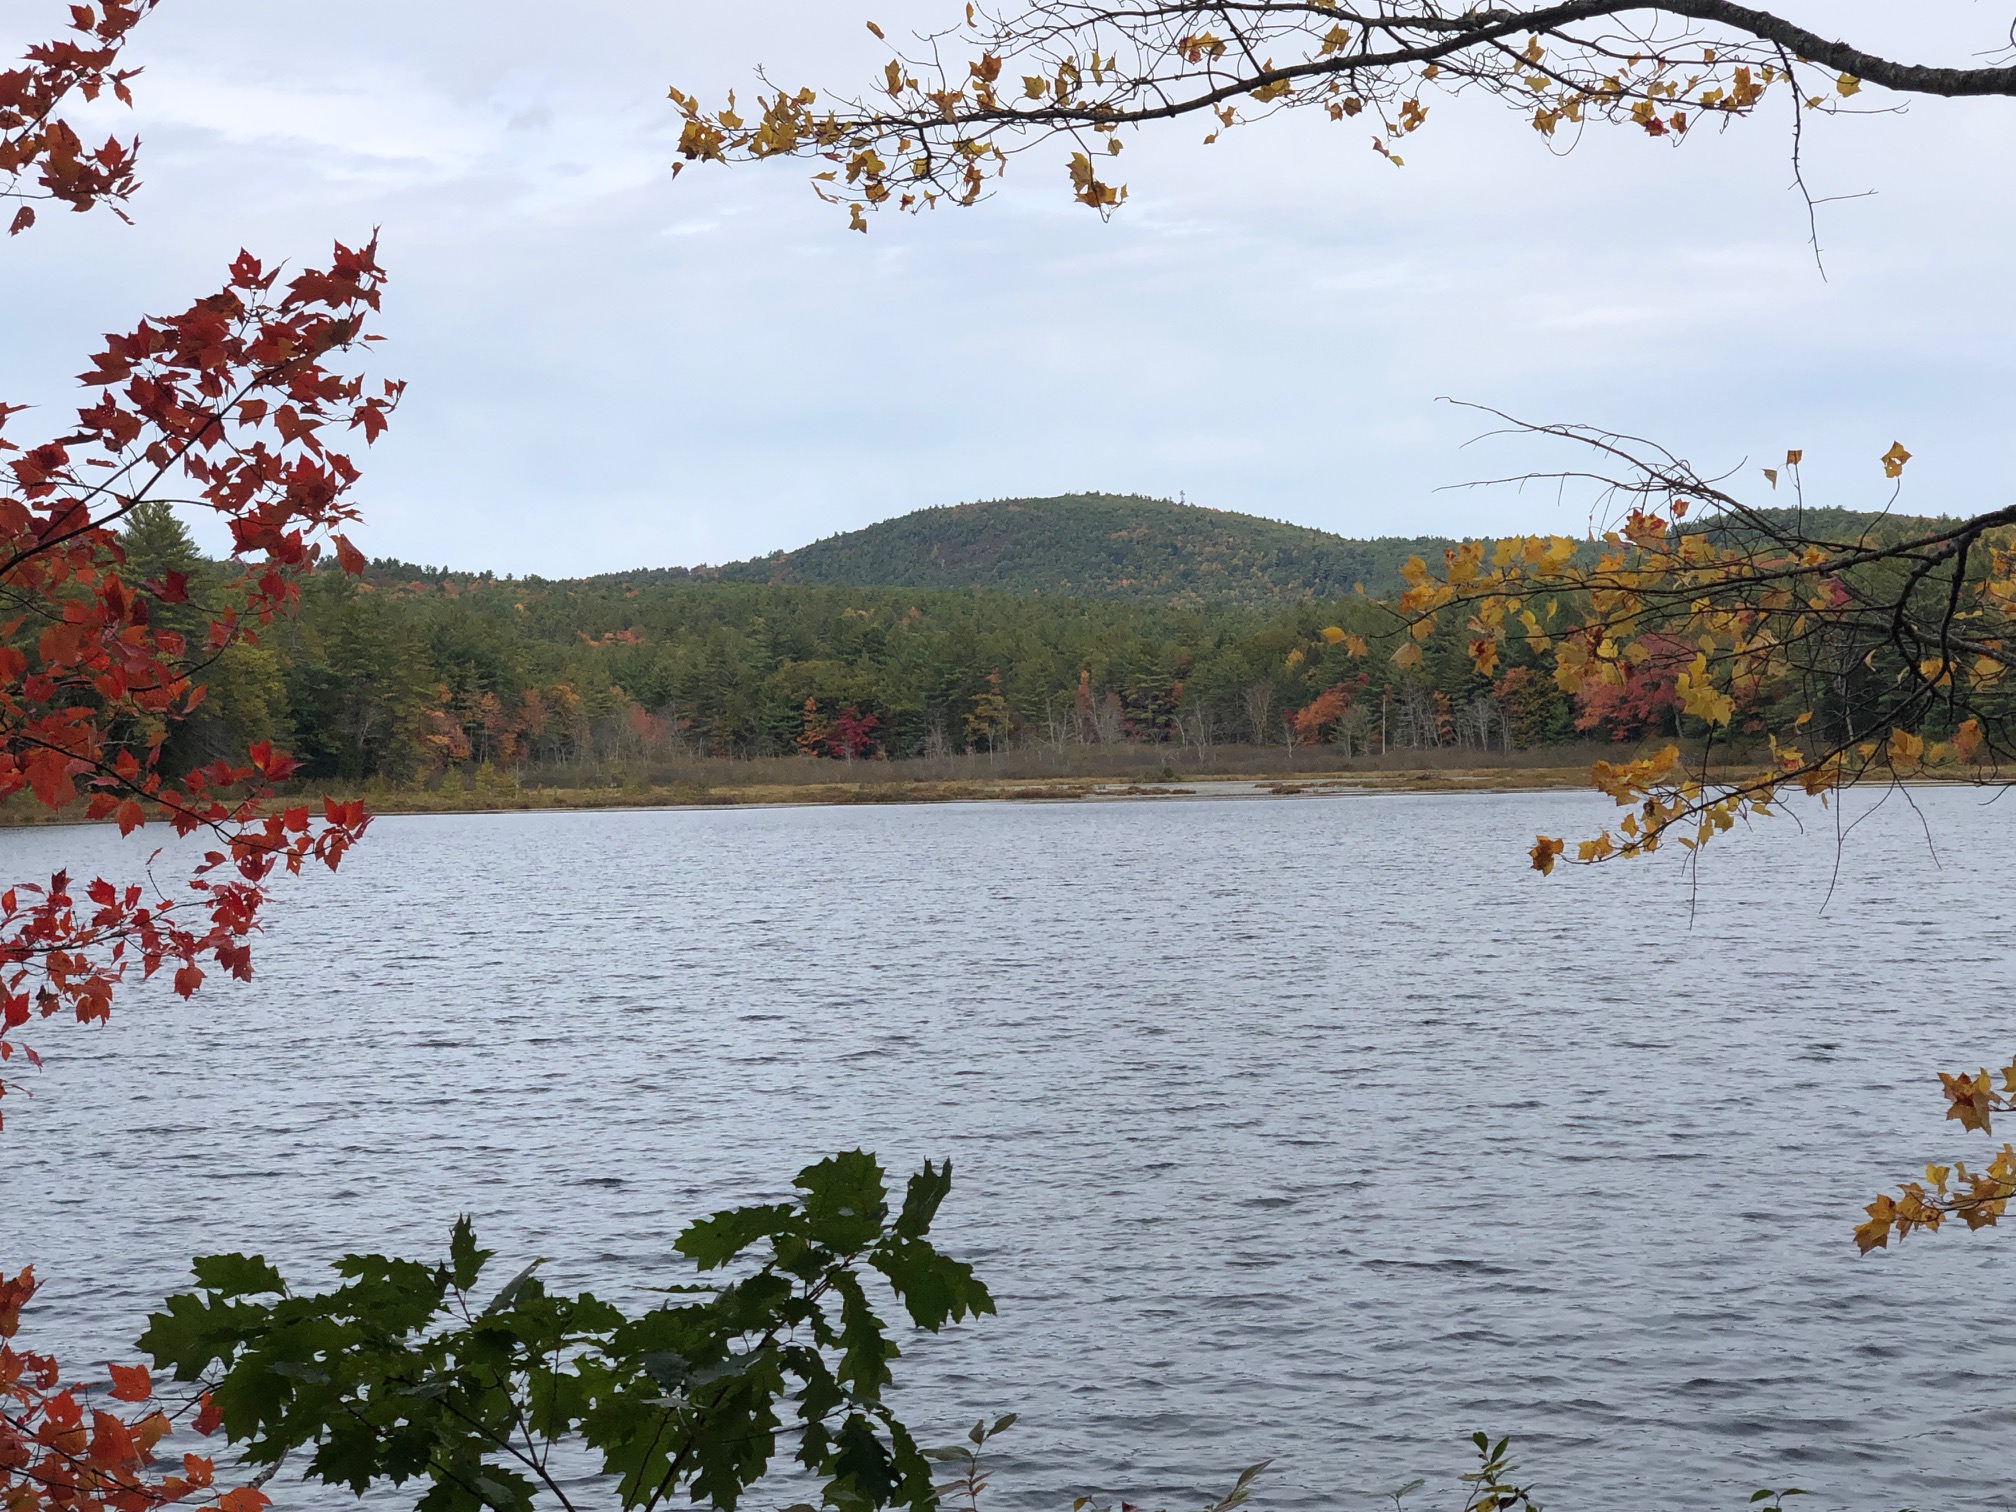 View overlooking Moores Pond with Mount Grace in the distance, 2019